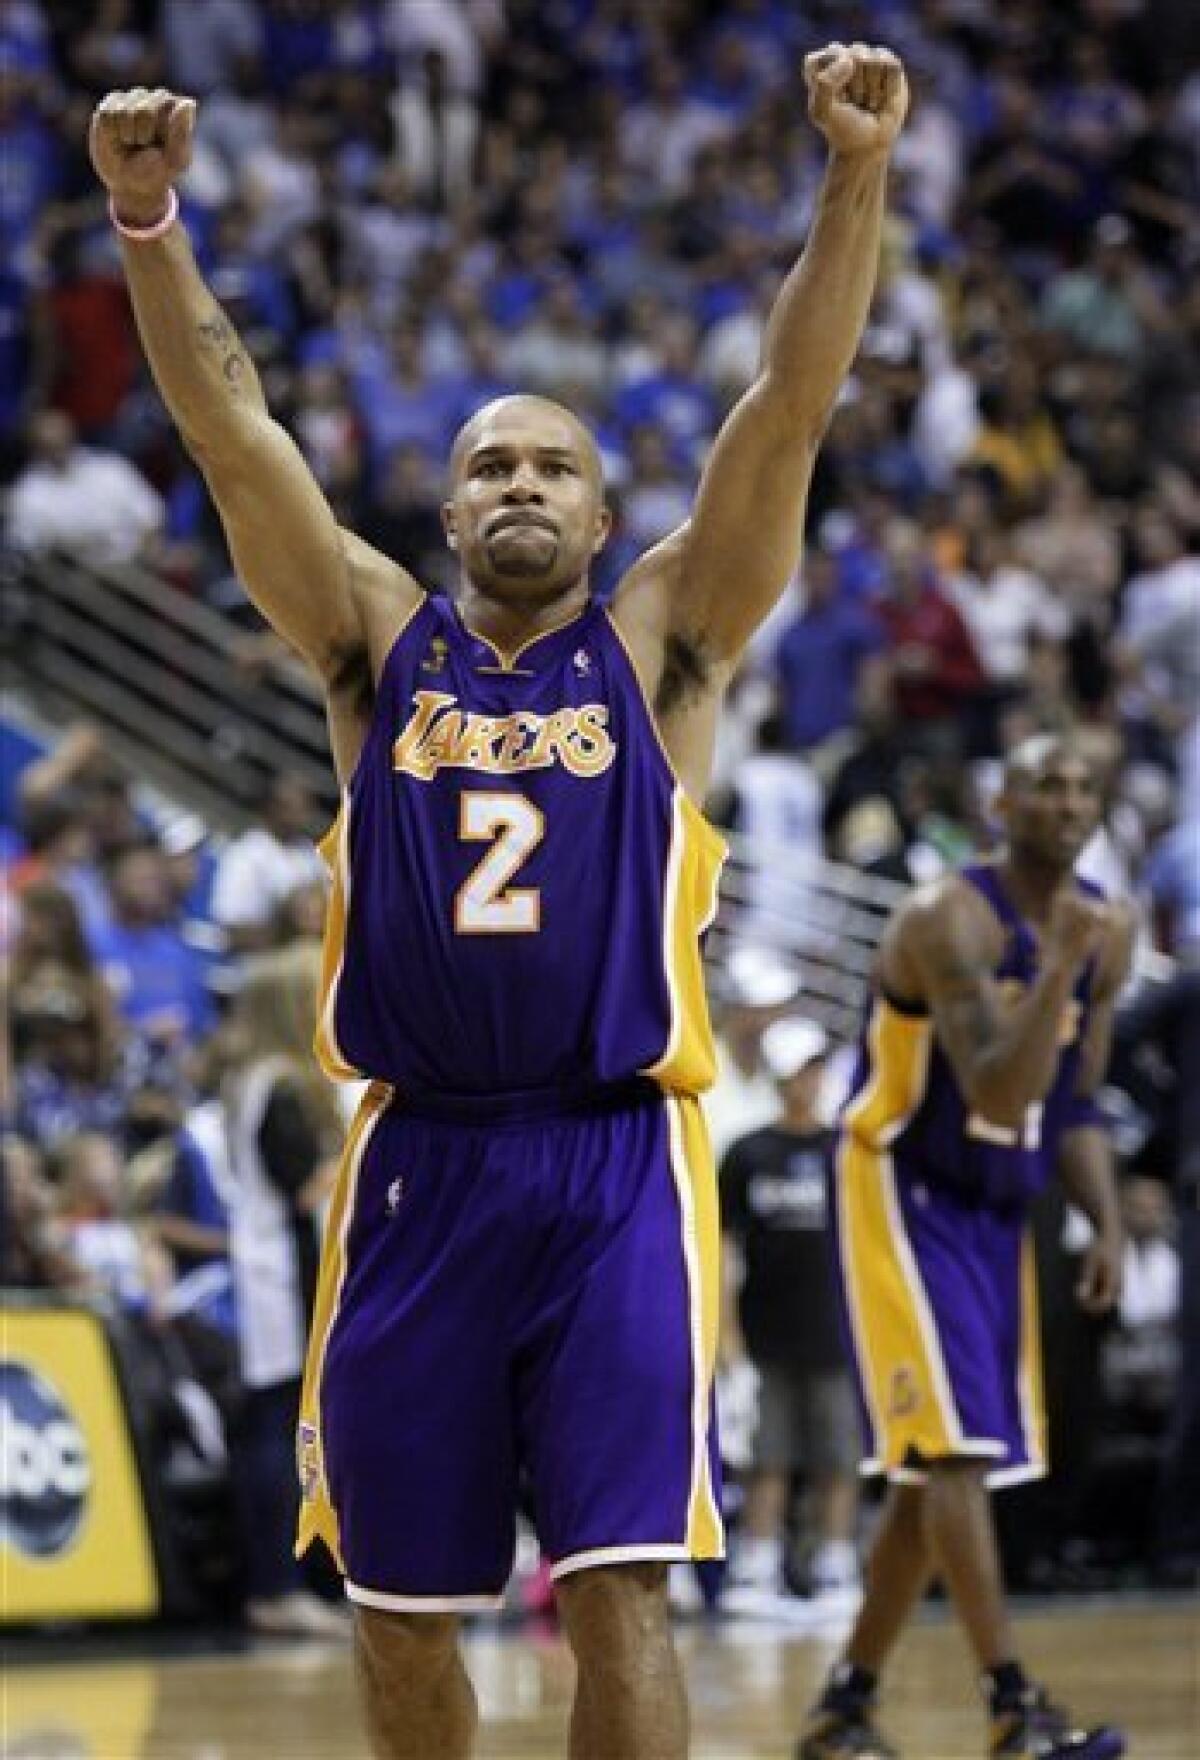 Los Angeles Lakers' Derek Fisher celebrates the Lakers' 99-91 overtime win over the Orlando Magic in Game 4 of the NBA basketball finals Friday, June 12, 2009, in Orlando, Fla. The Lakers take a 3-1 lead in the series. (AP Photo/David J. Phillip)